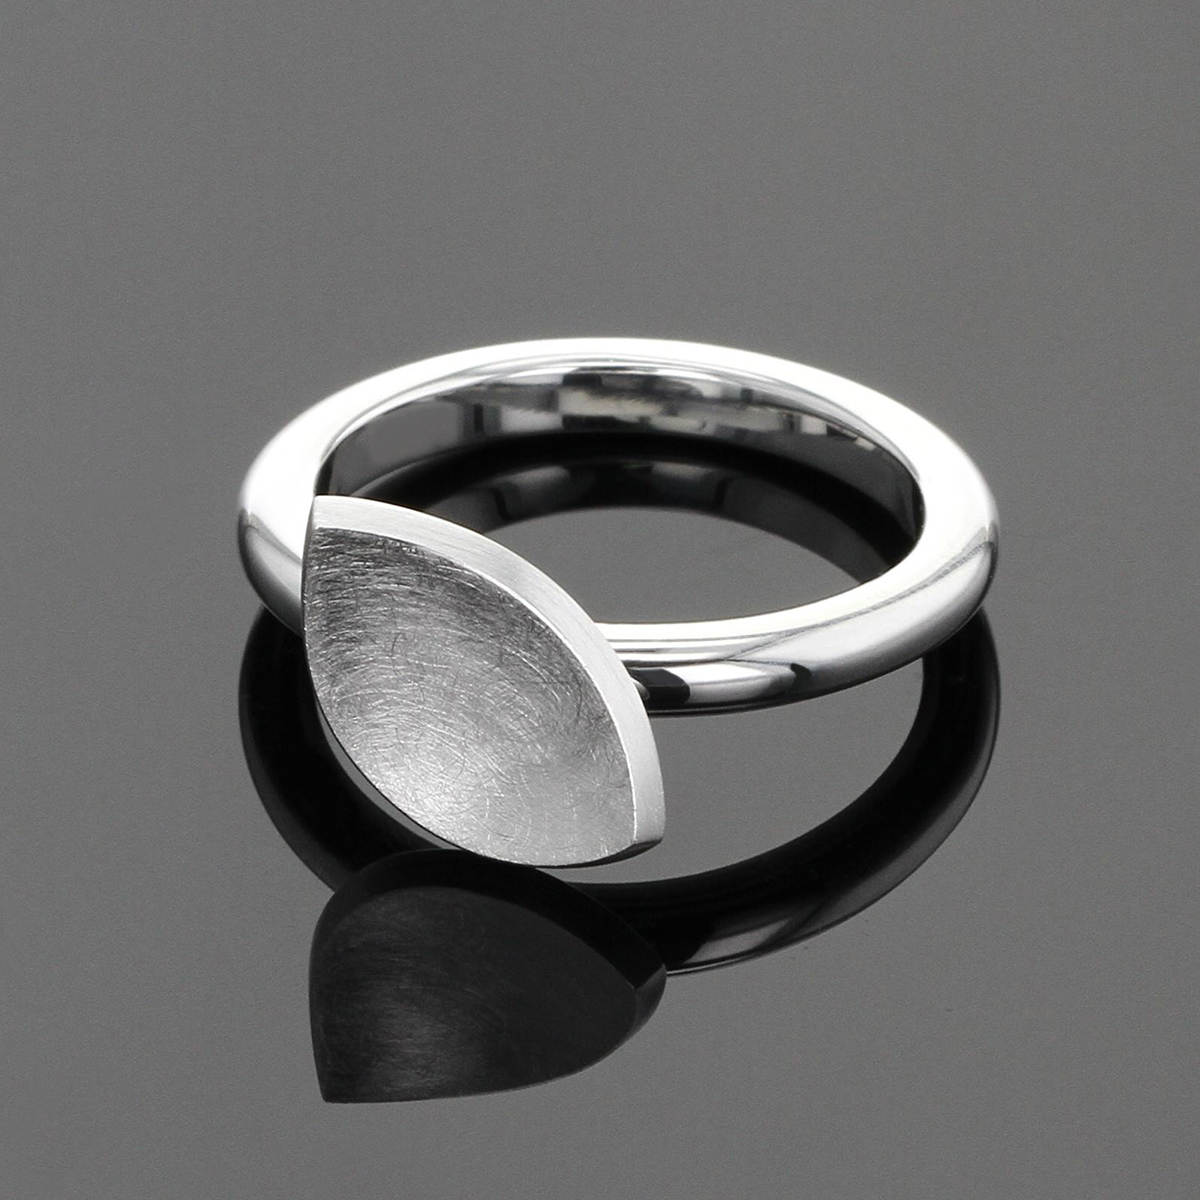 Unique silver rings made in Mauritius